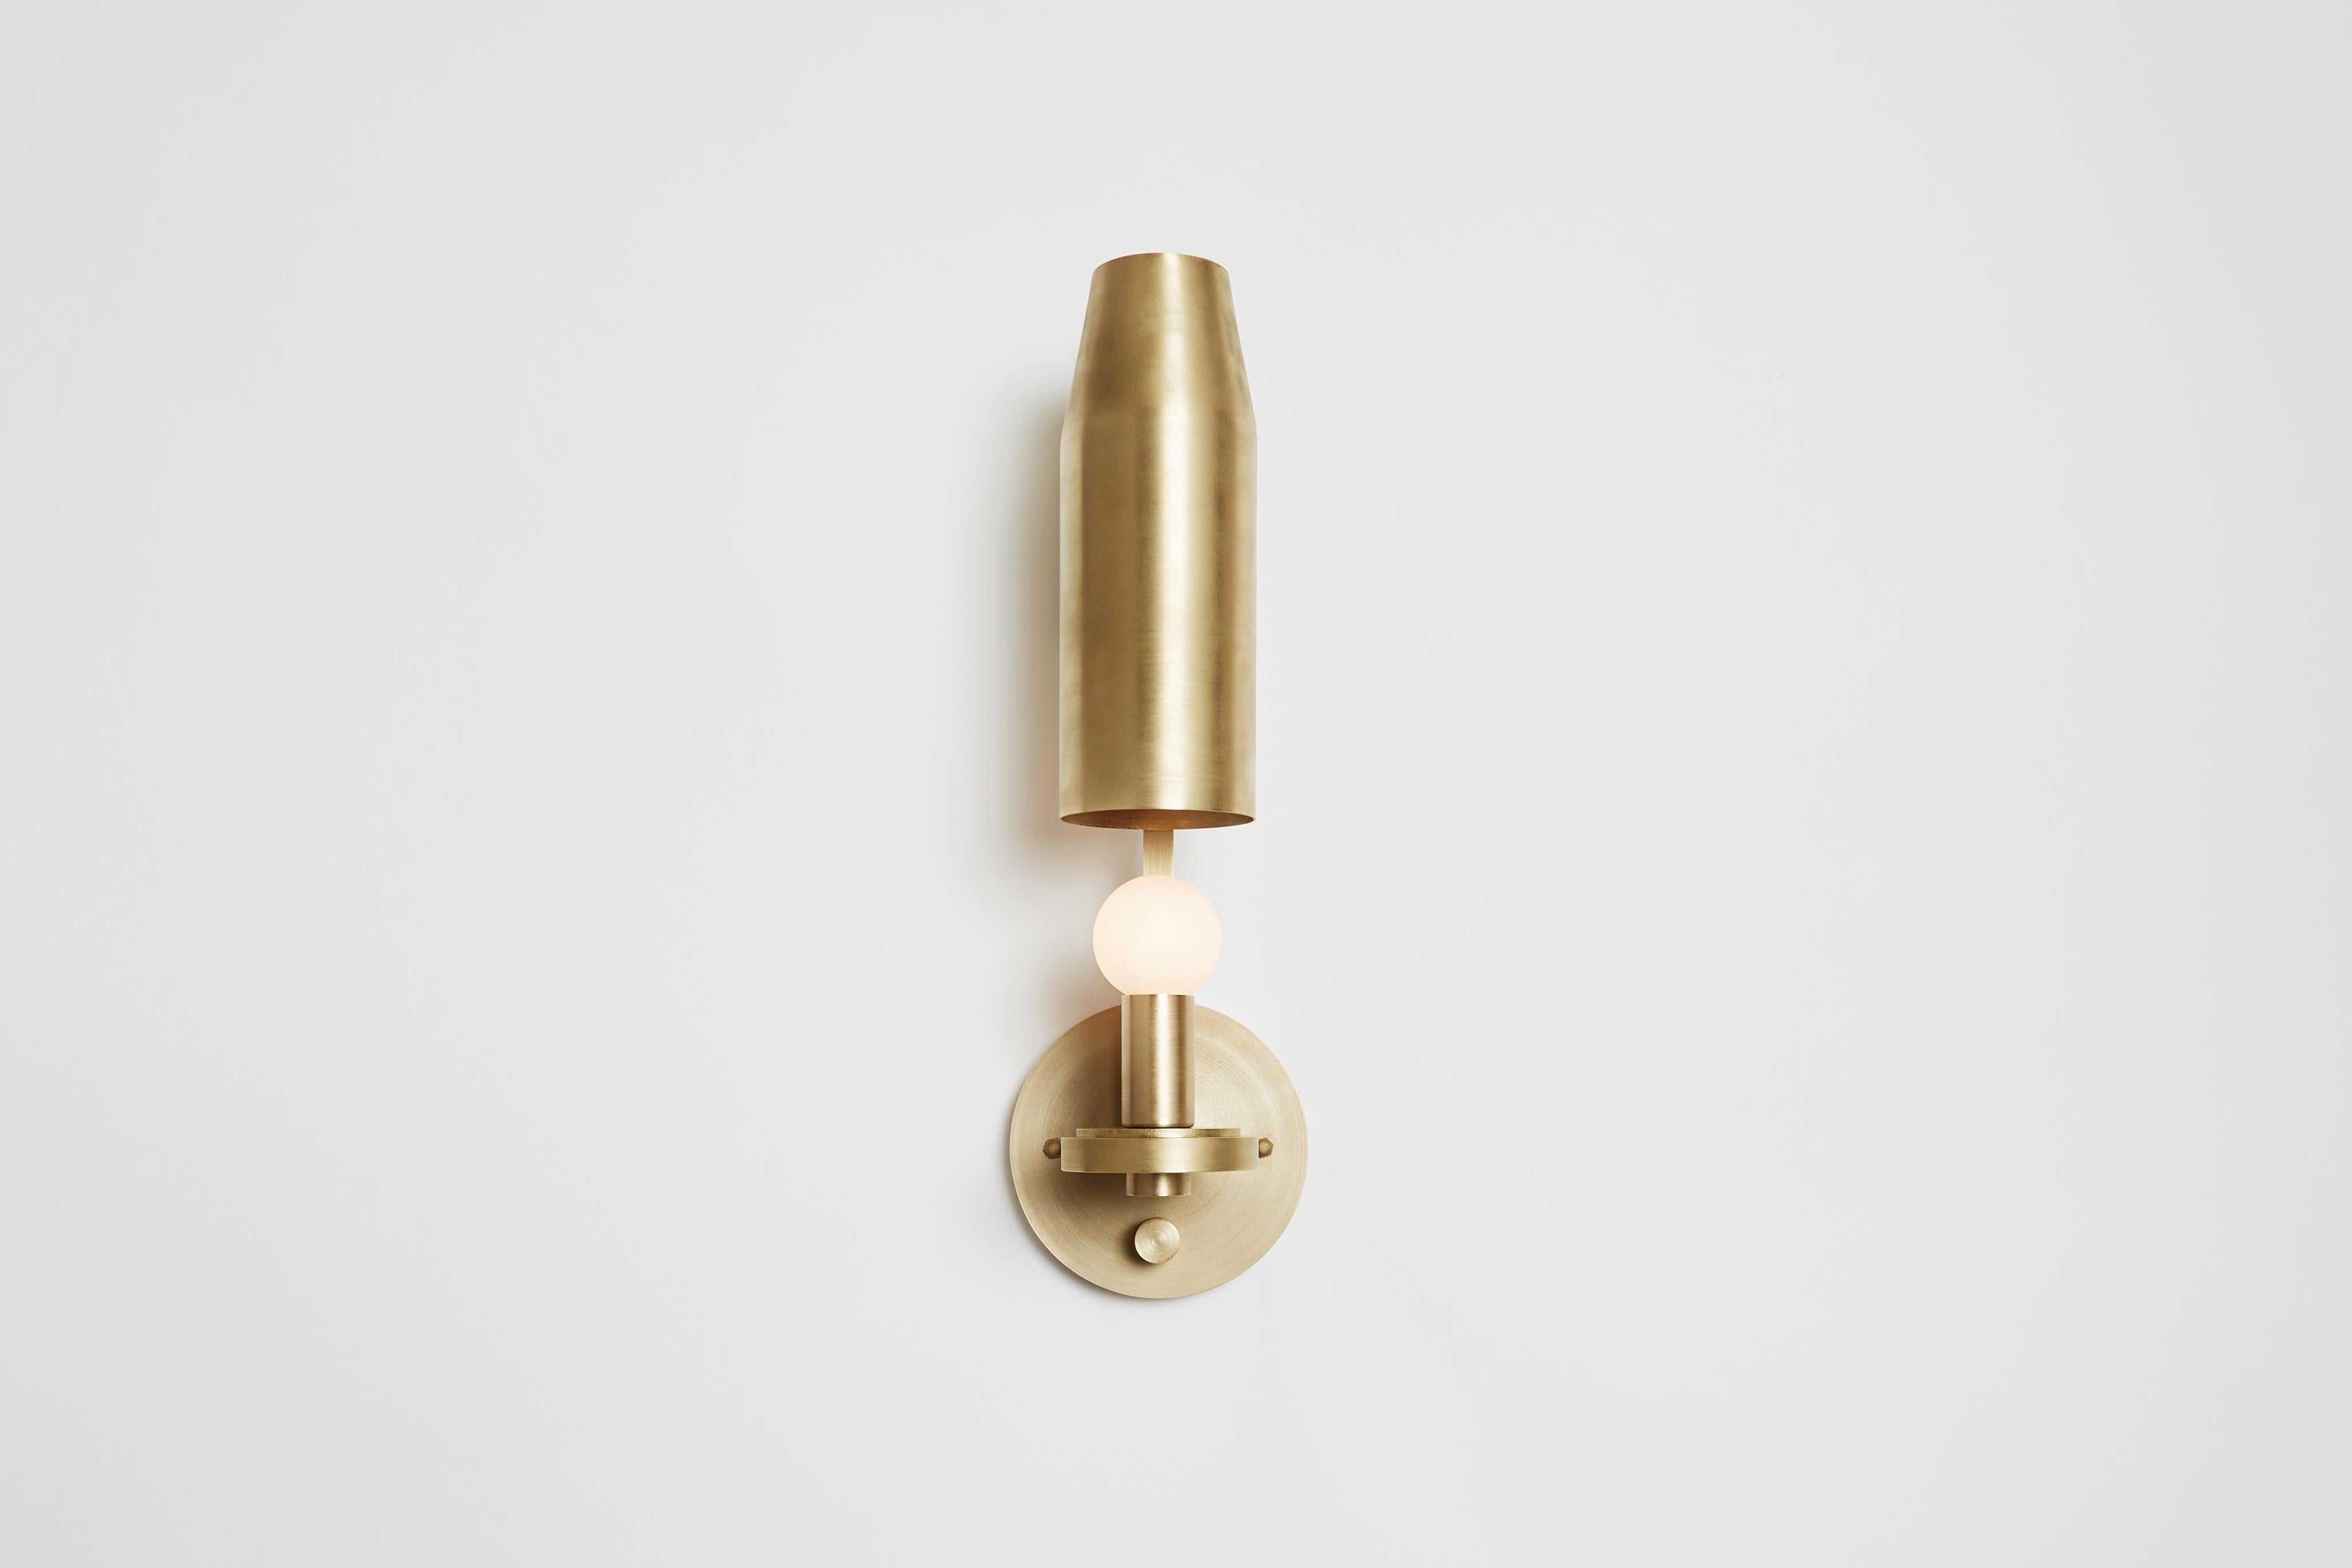 The Chamber Sconce features an adjustable metal shade that conceals or reveals light by degree. Composed of square brass tubing supporting a sculptural shroud, the fixture is suitable for myriad applications given its adaptable nature. Features an